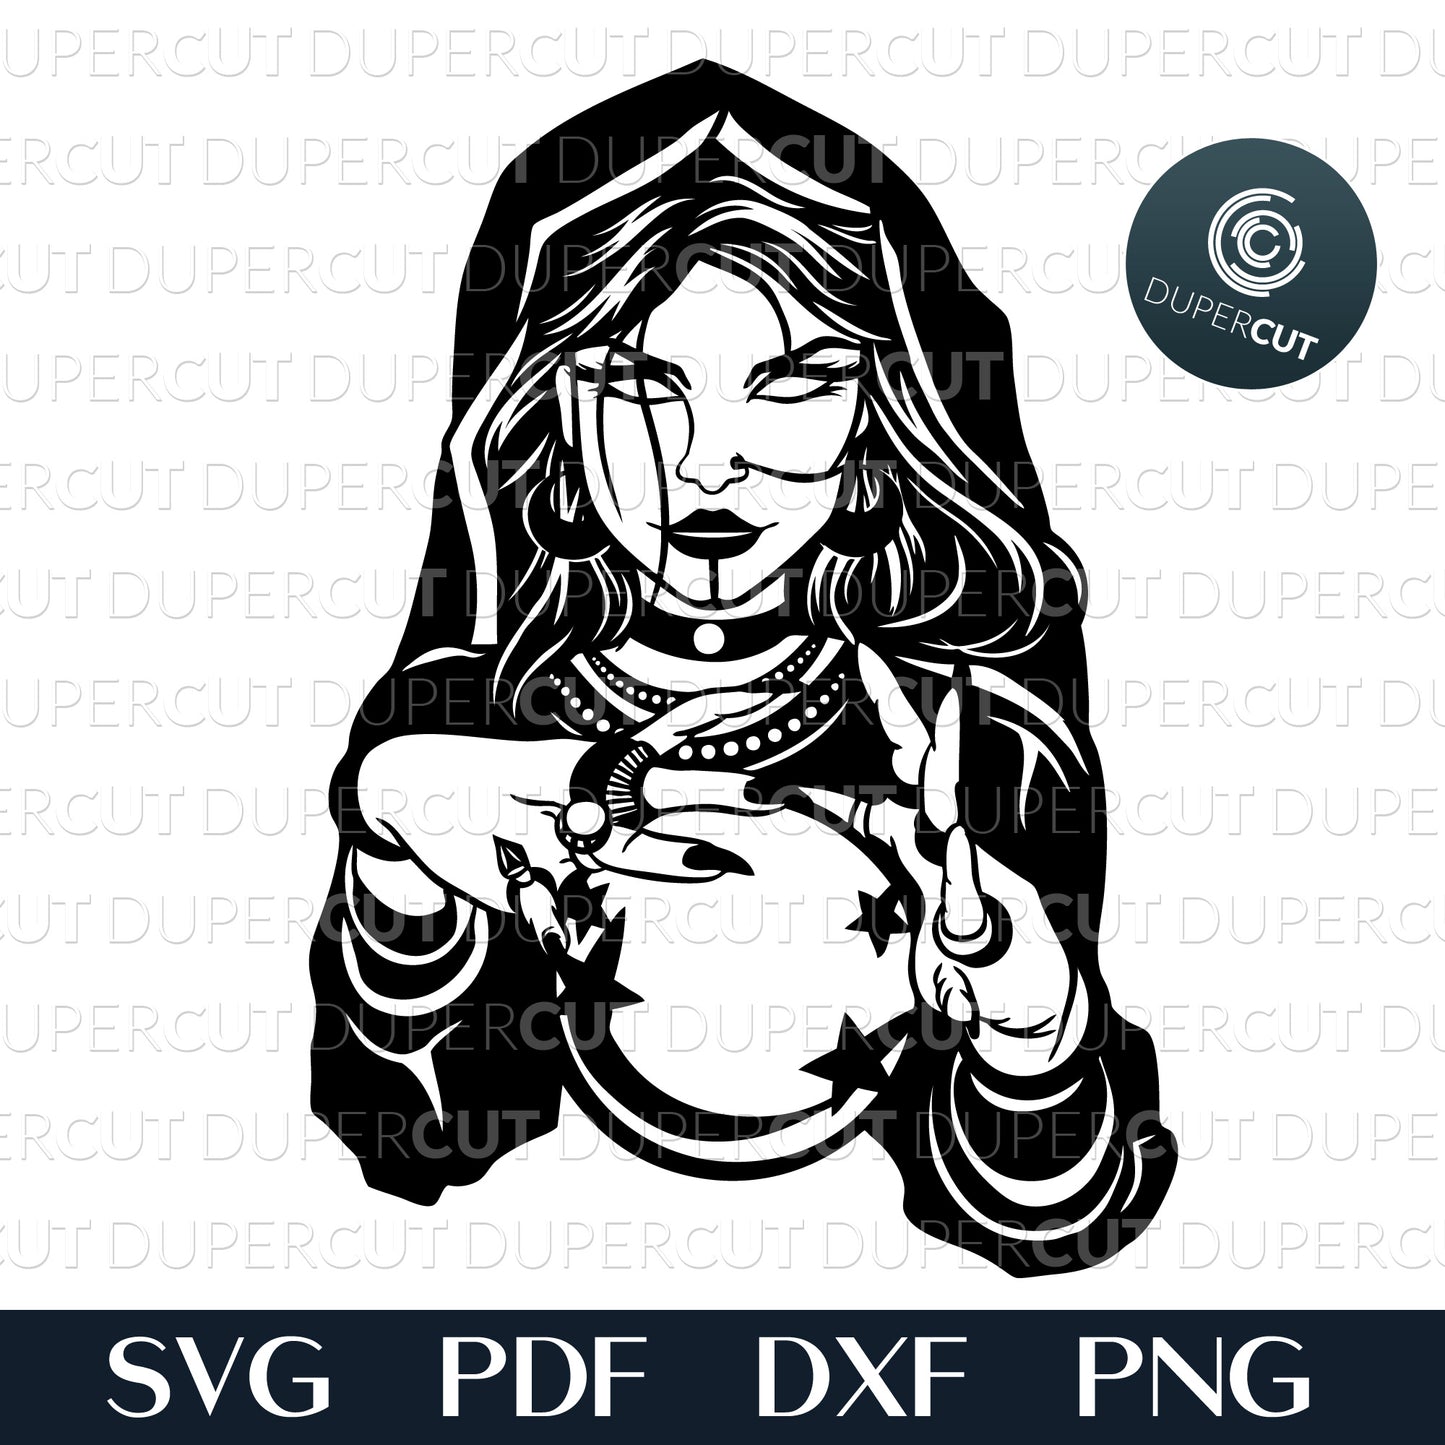 Paper cutting template - Fortuneteller Illustration - Black and white gothic - print on demand files